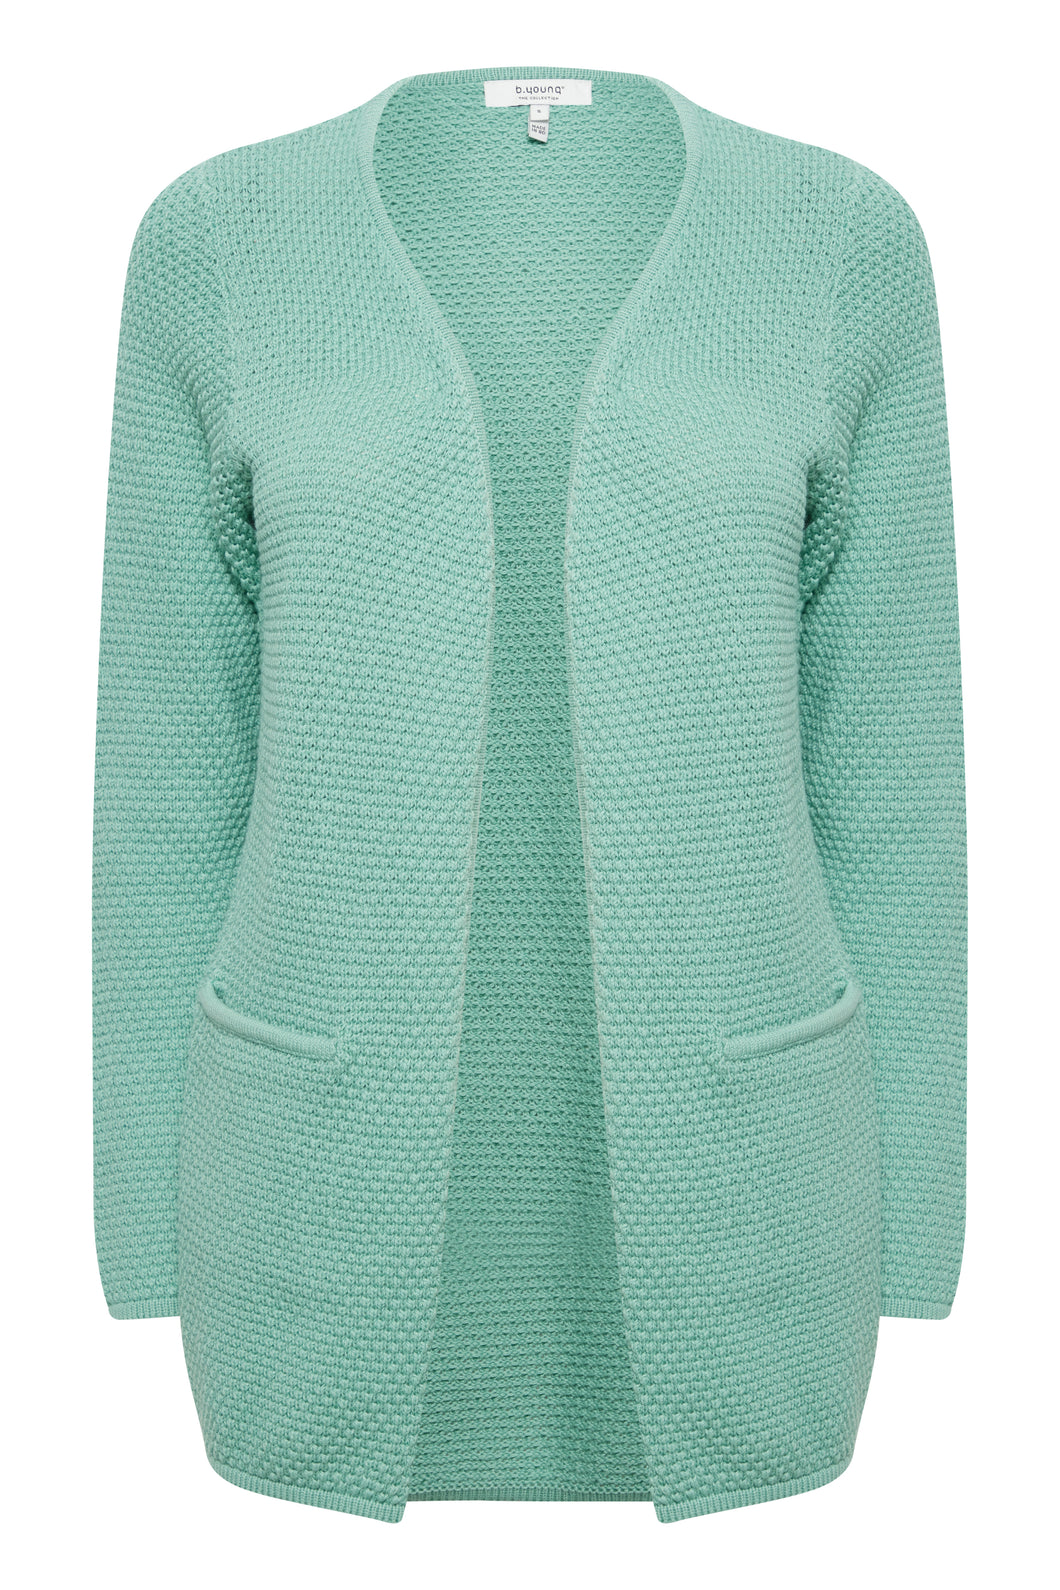 Byoung Bymikala Cardigan in Creme De Menthe